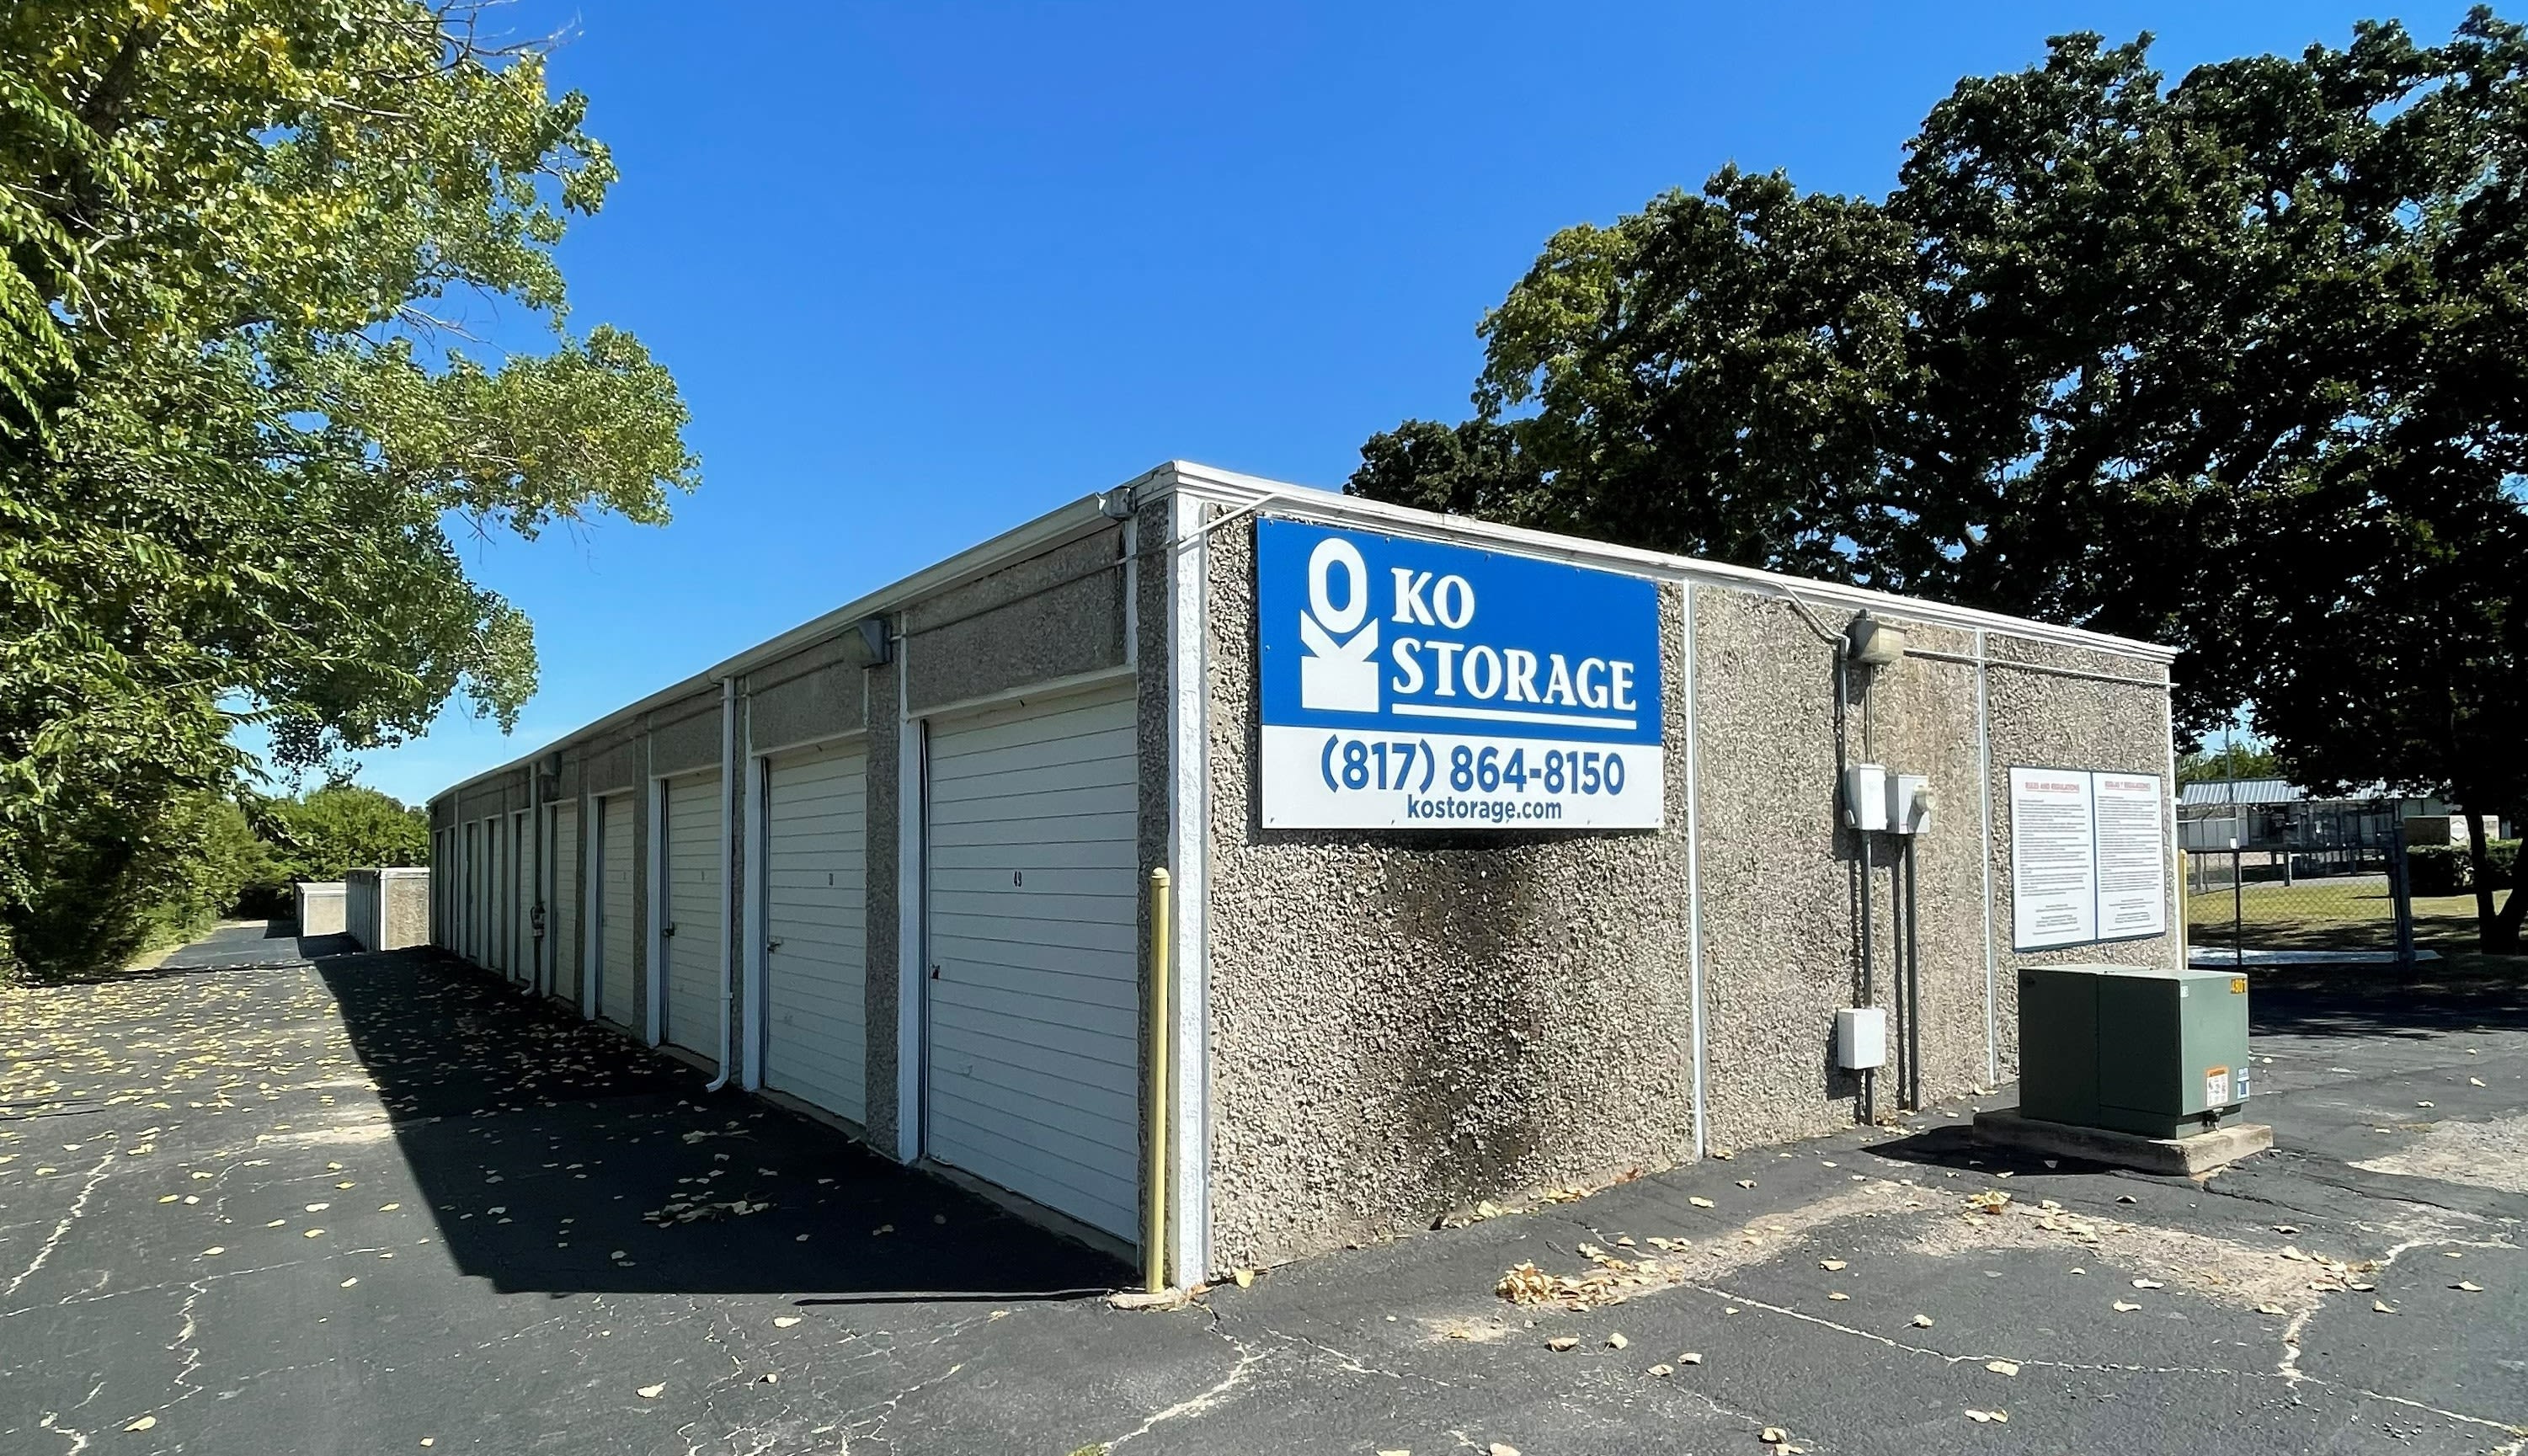 Map and directions to KO Storage in Weatherford, Texas